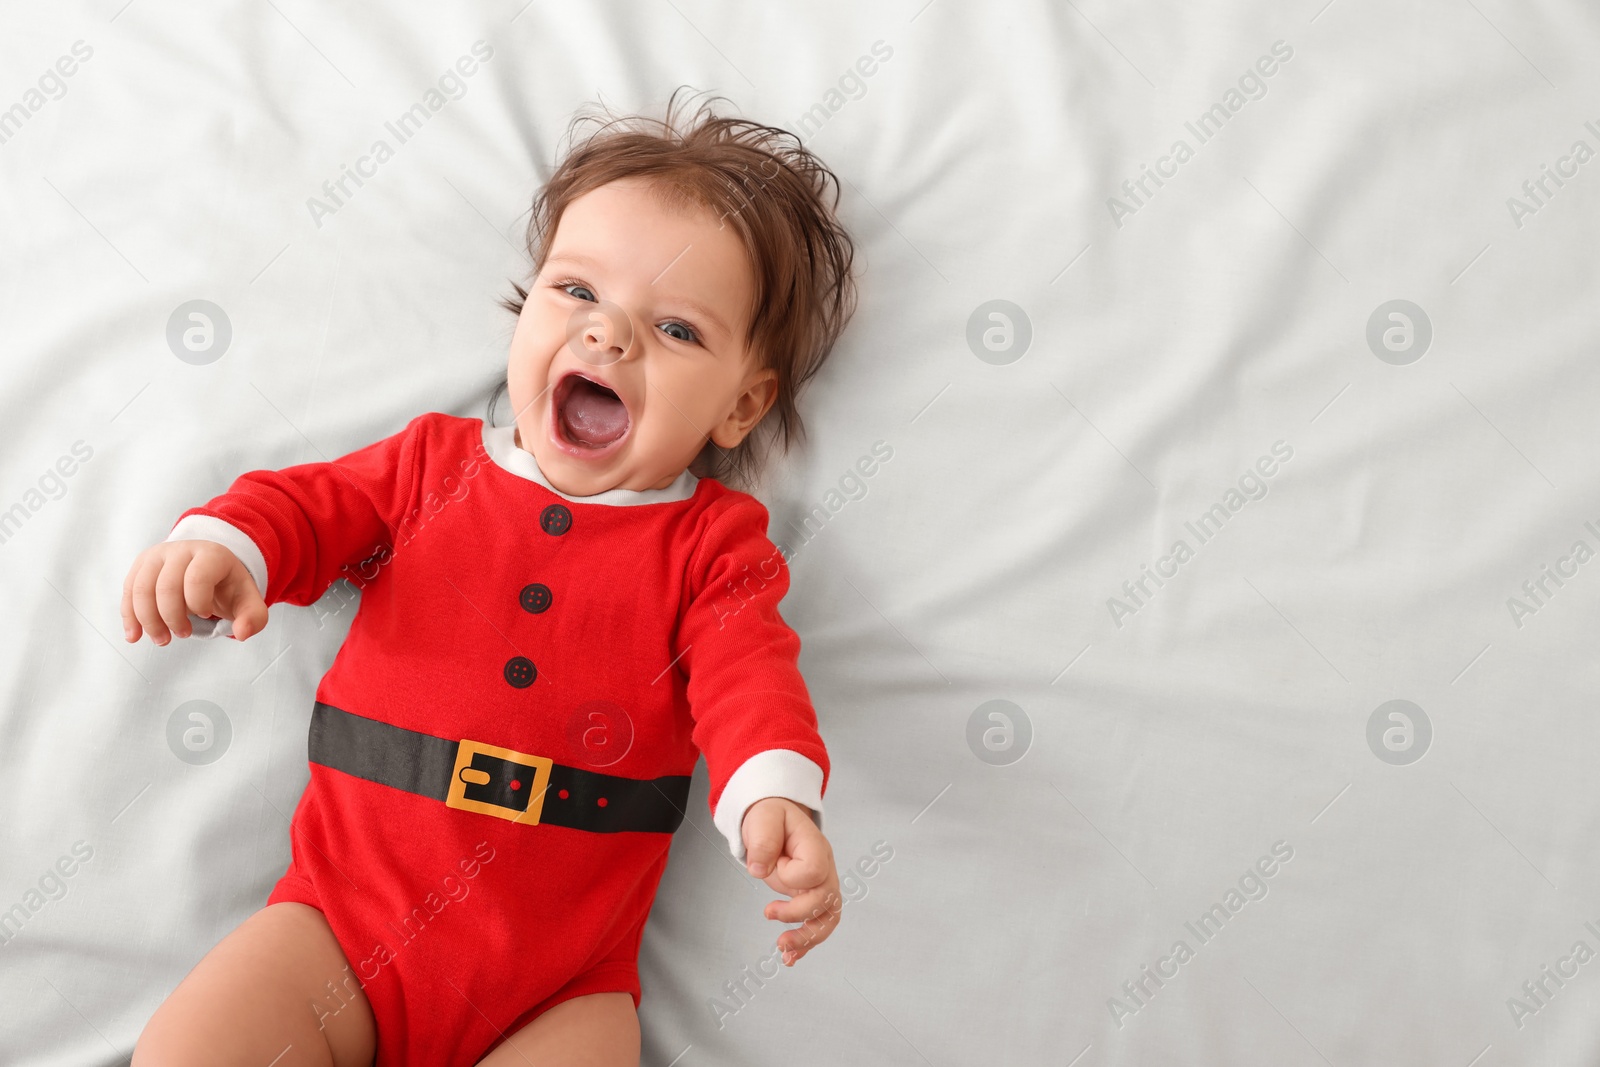 Photo of Cute baby wearing festive Christmas costume on white bedsheet, top view. Space for text